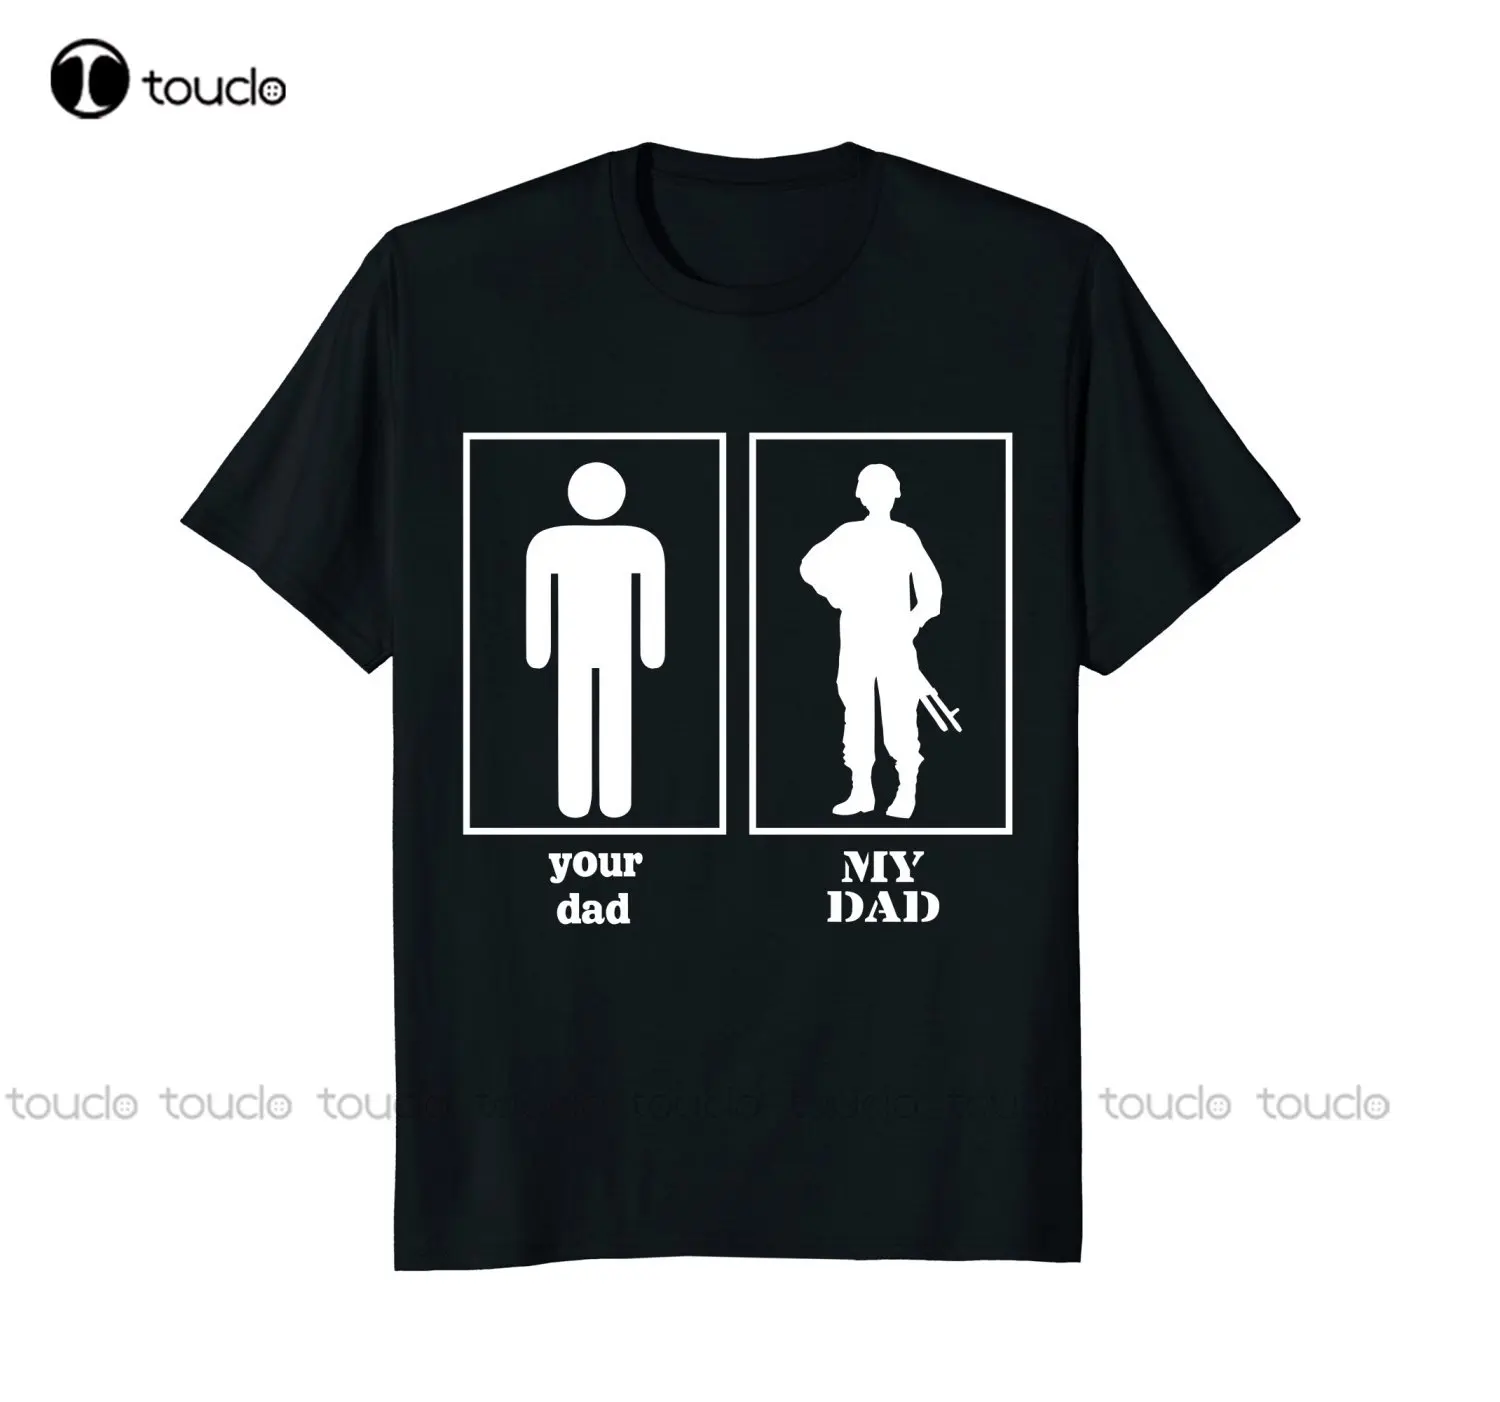 

New New Brand 100 % Cotton Your Dad My Dad Proud Soldier Officer Military T Shirt Graphic Shirts Unisex S-5Xl